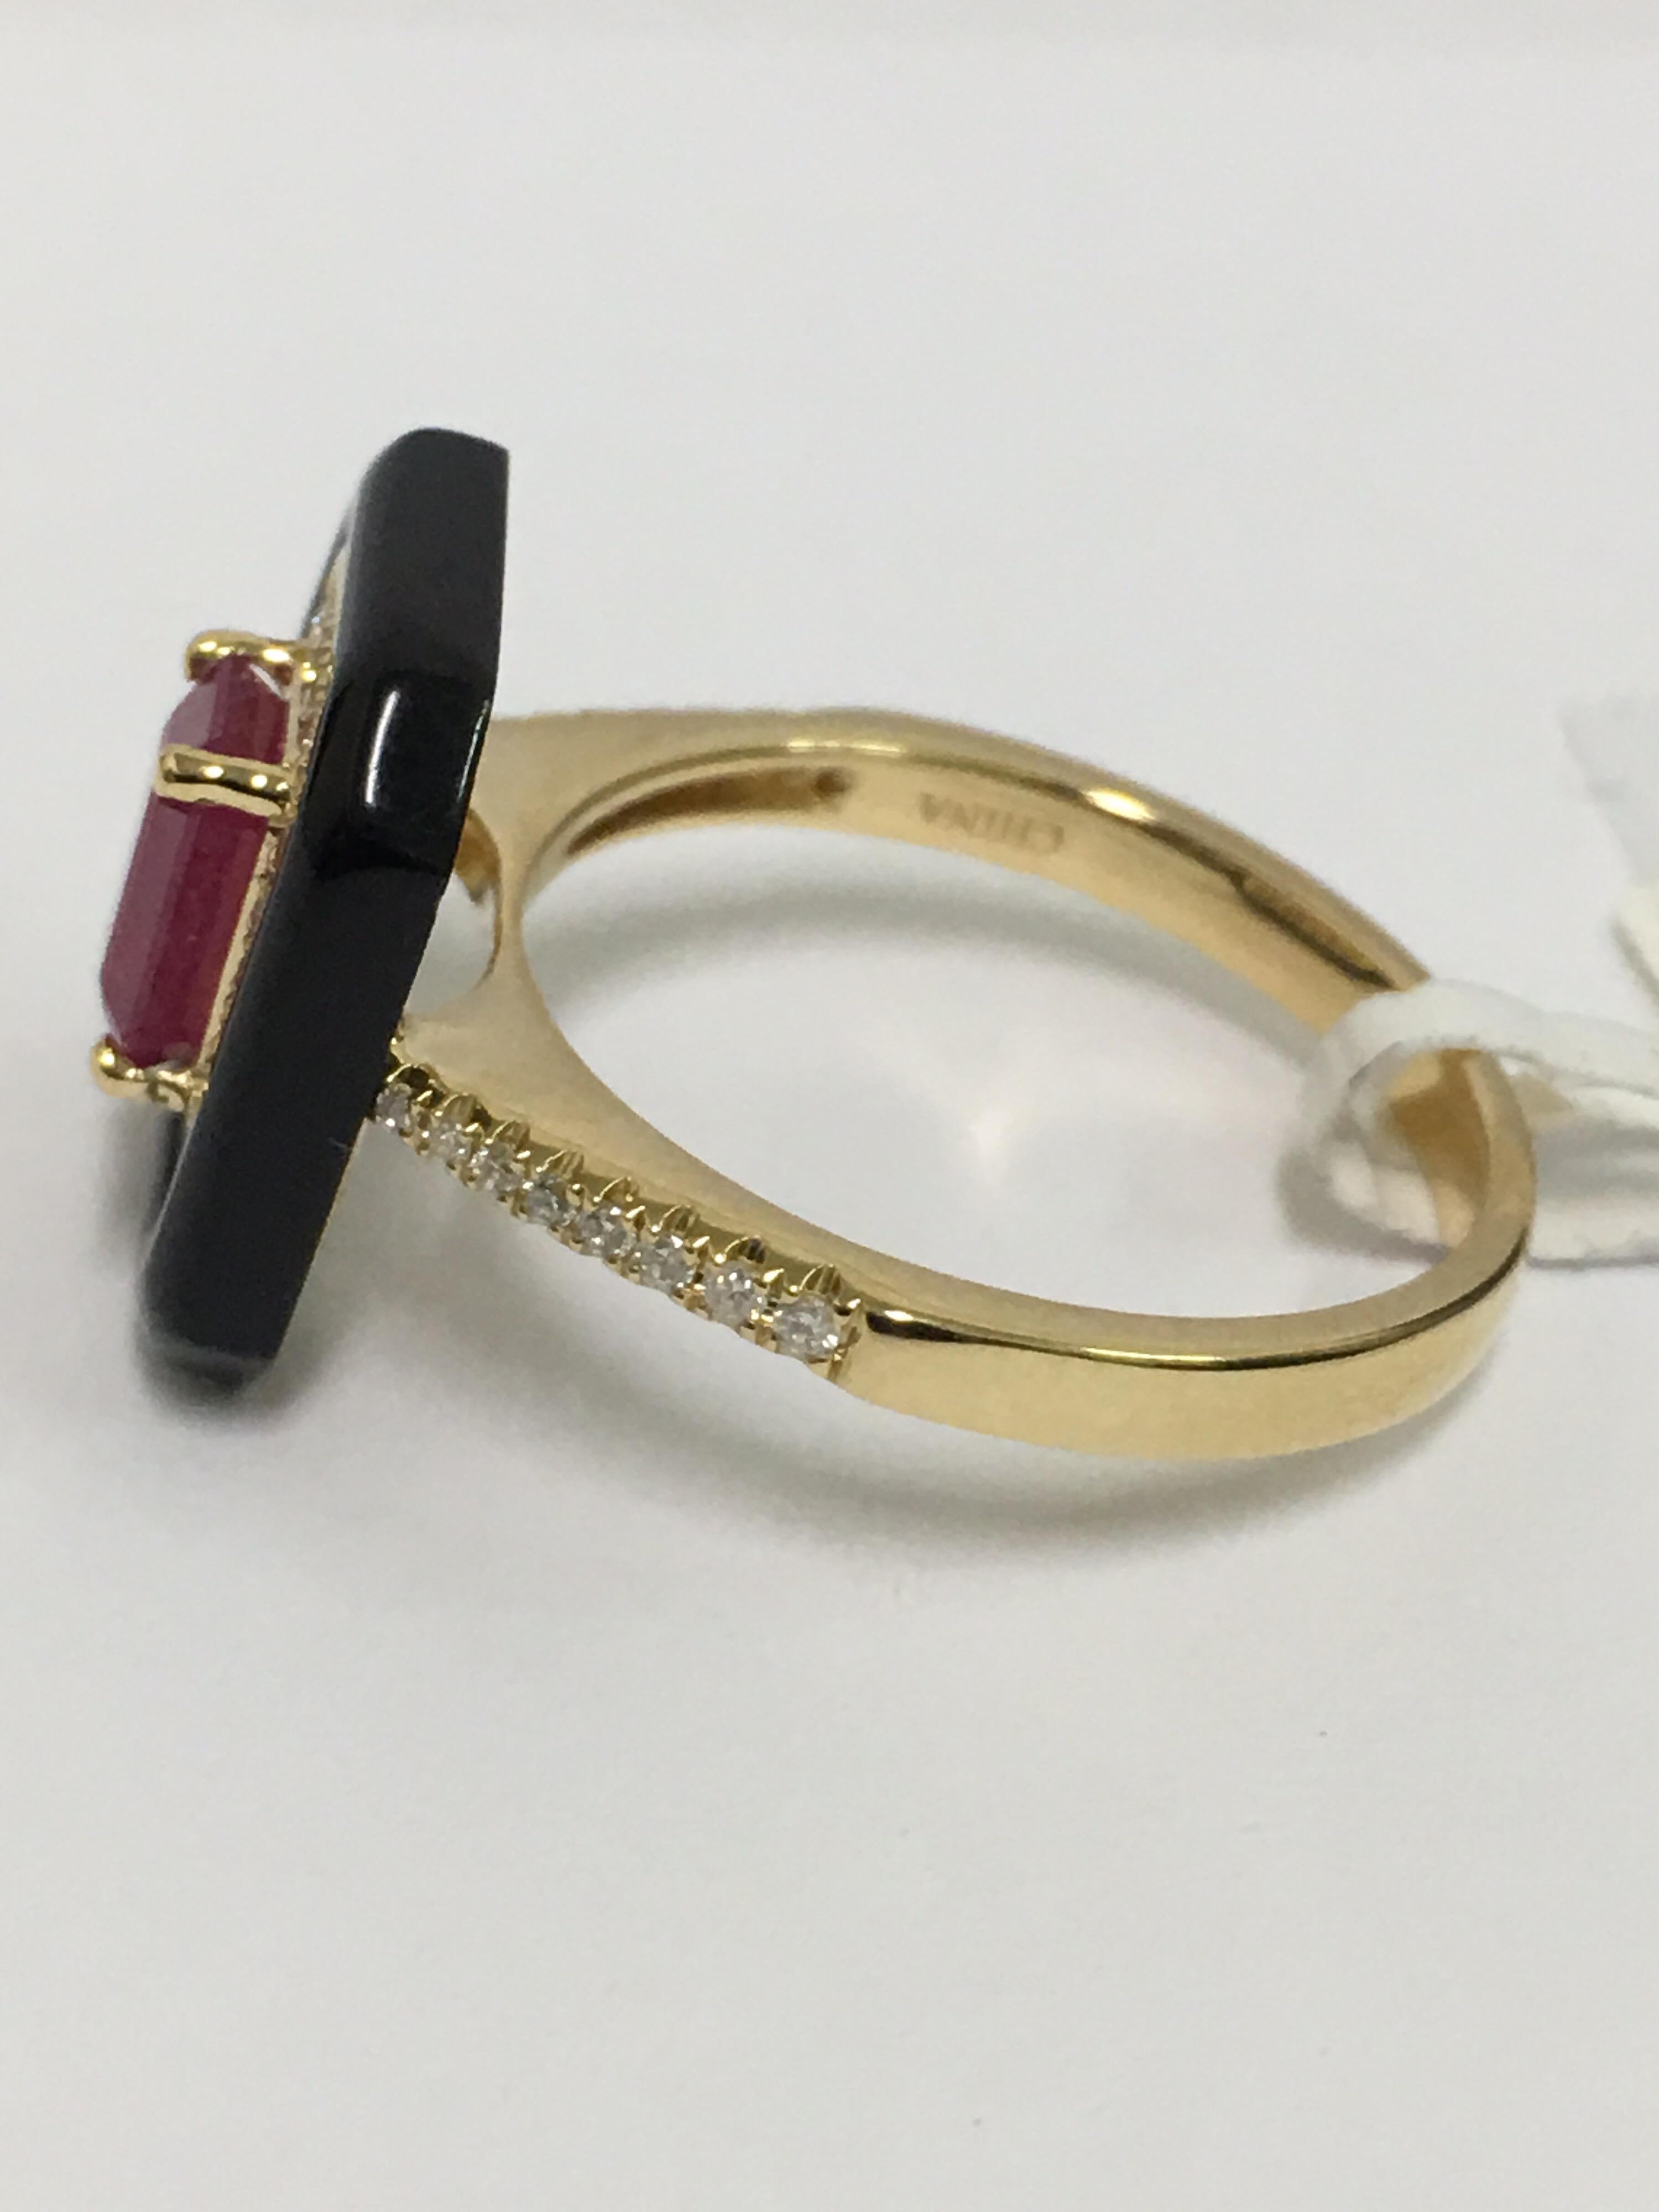 Natural Ruby weight 1.26 Carat.
Black Onyx  weight 2.25 Carat.
Round White Diamonds 0.21 Carat.
The ring is 18 Karat Yellow Gold.
Size is 6,5 can be resized.
